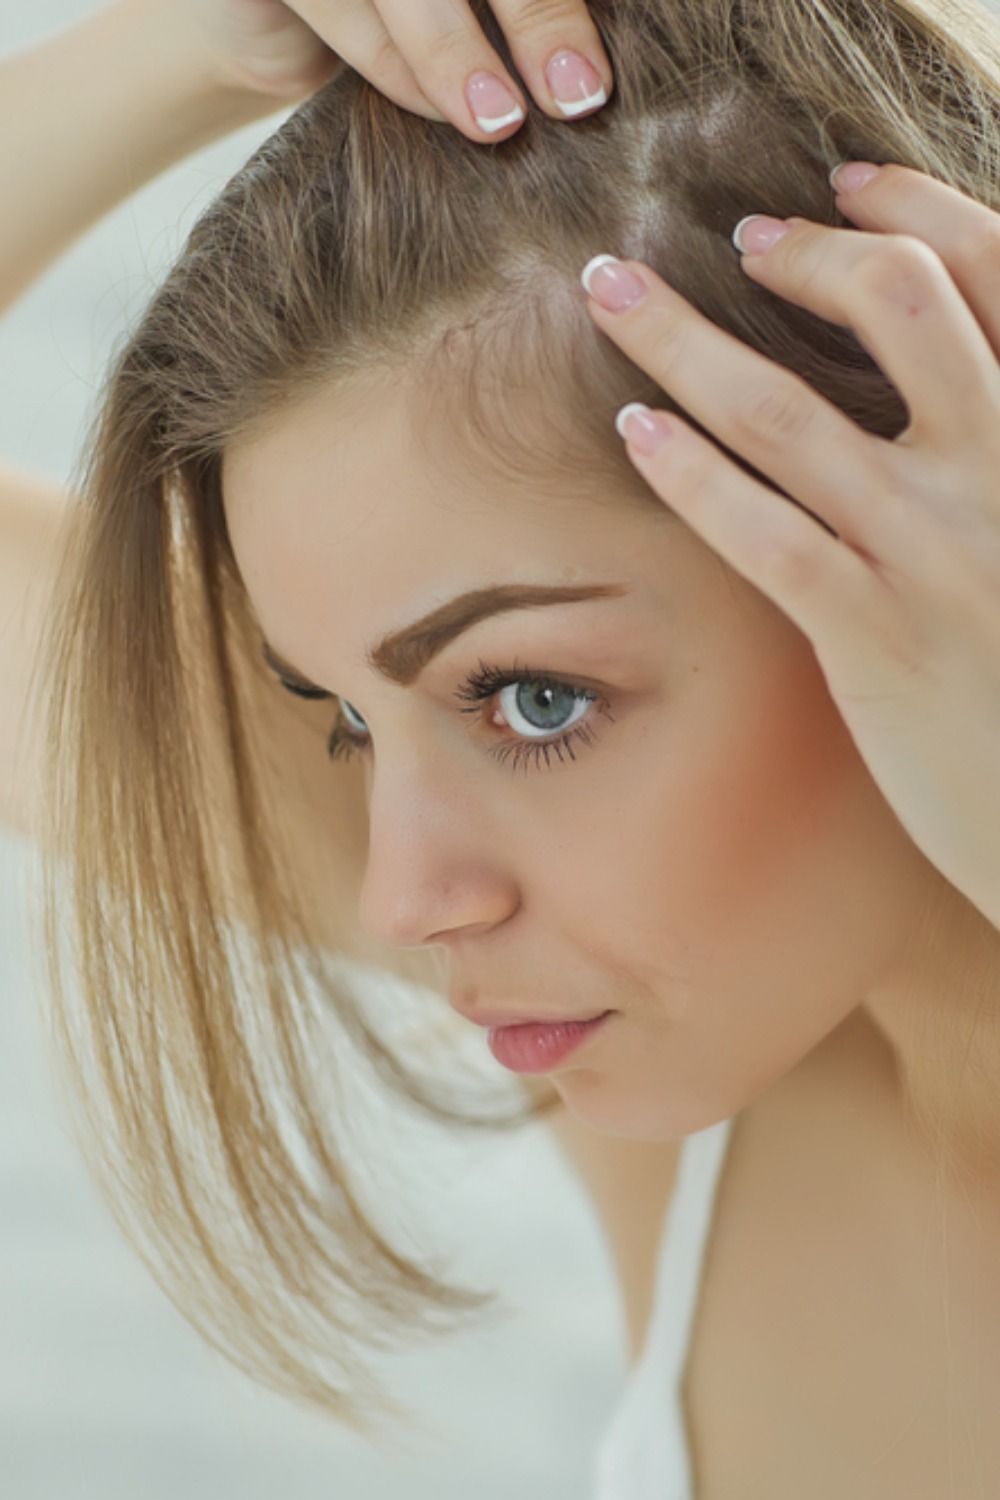 Do You Have Lice Or Dandruff? Learn The Difference ...